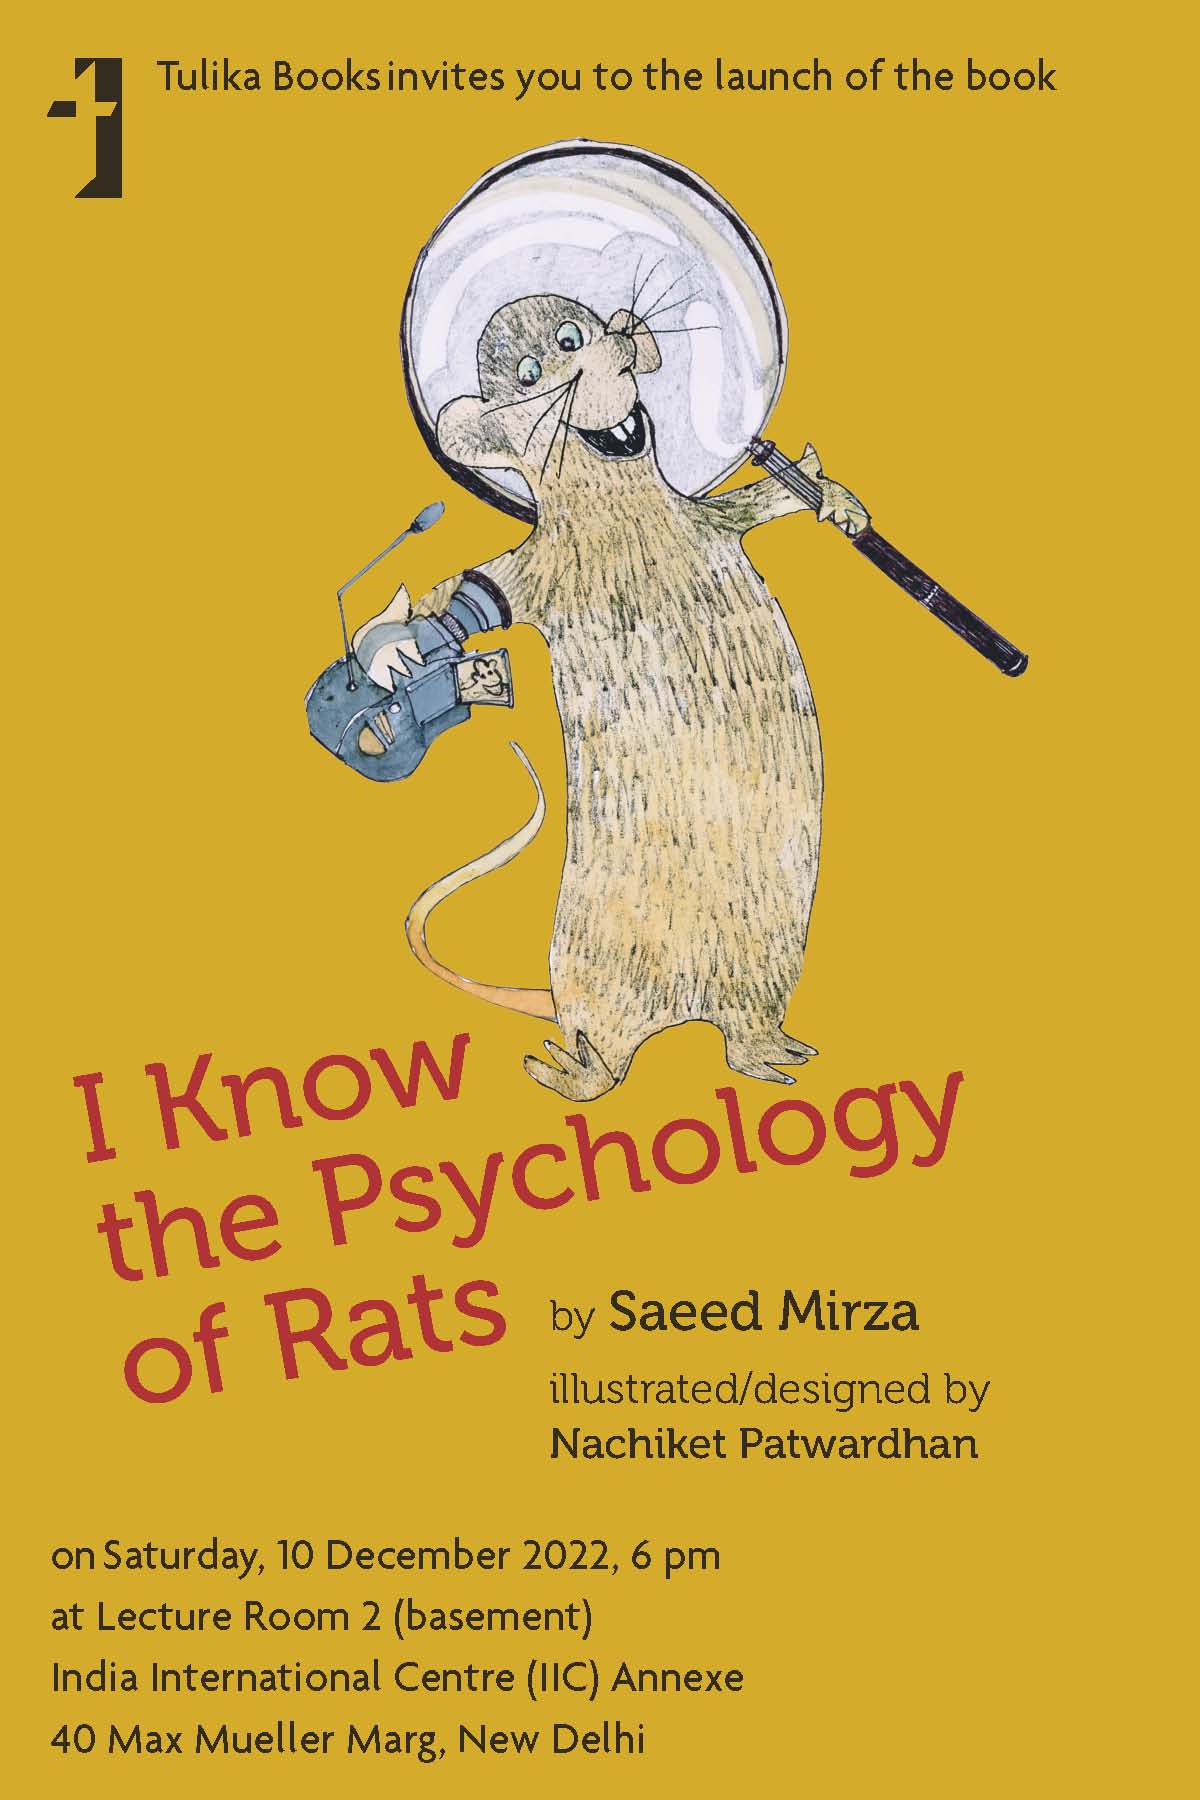 BOOK LAUNCH - I KNOW THE PSYCHOLOGY OF RATS